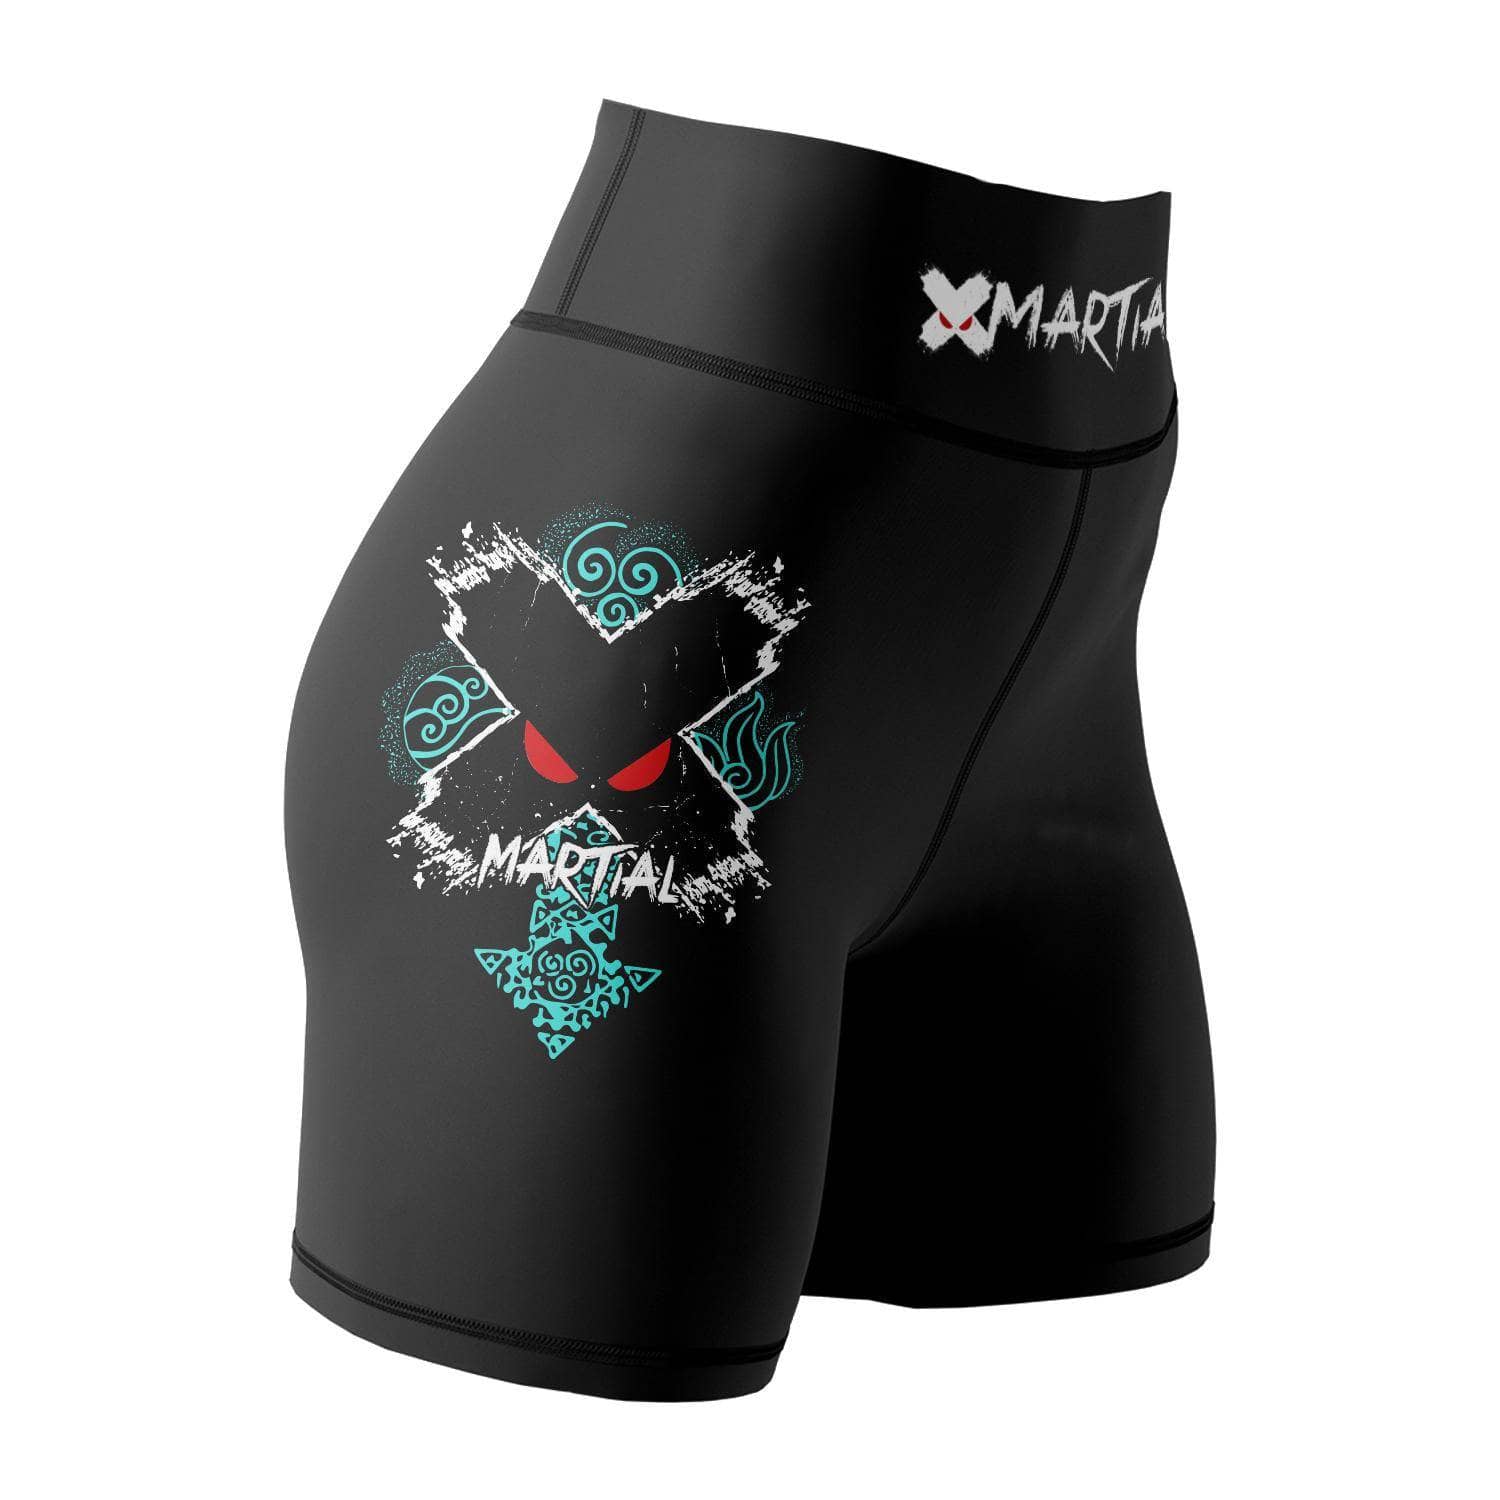 Extreme X Style Bender Women's BJJ/MMA Compression Shorts XMARTIAL